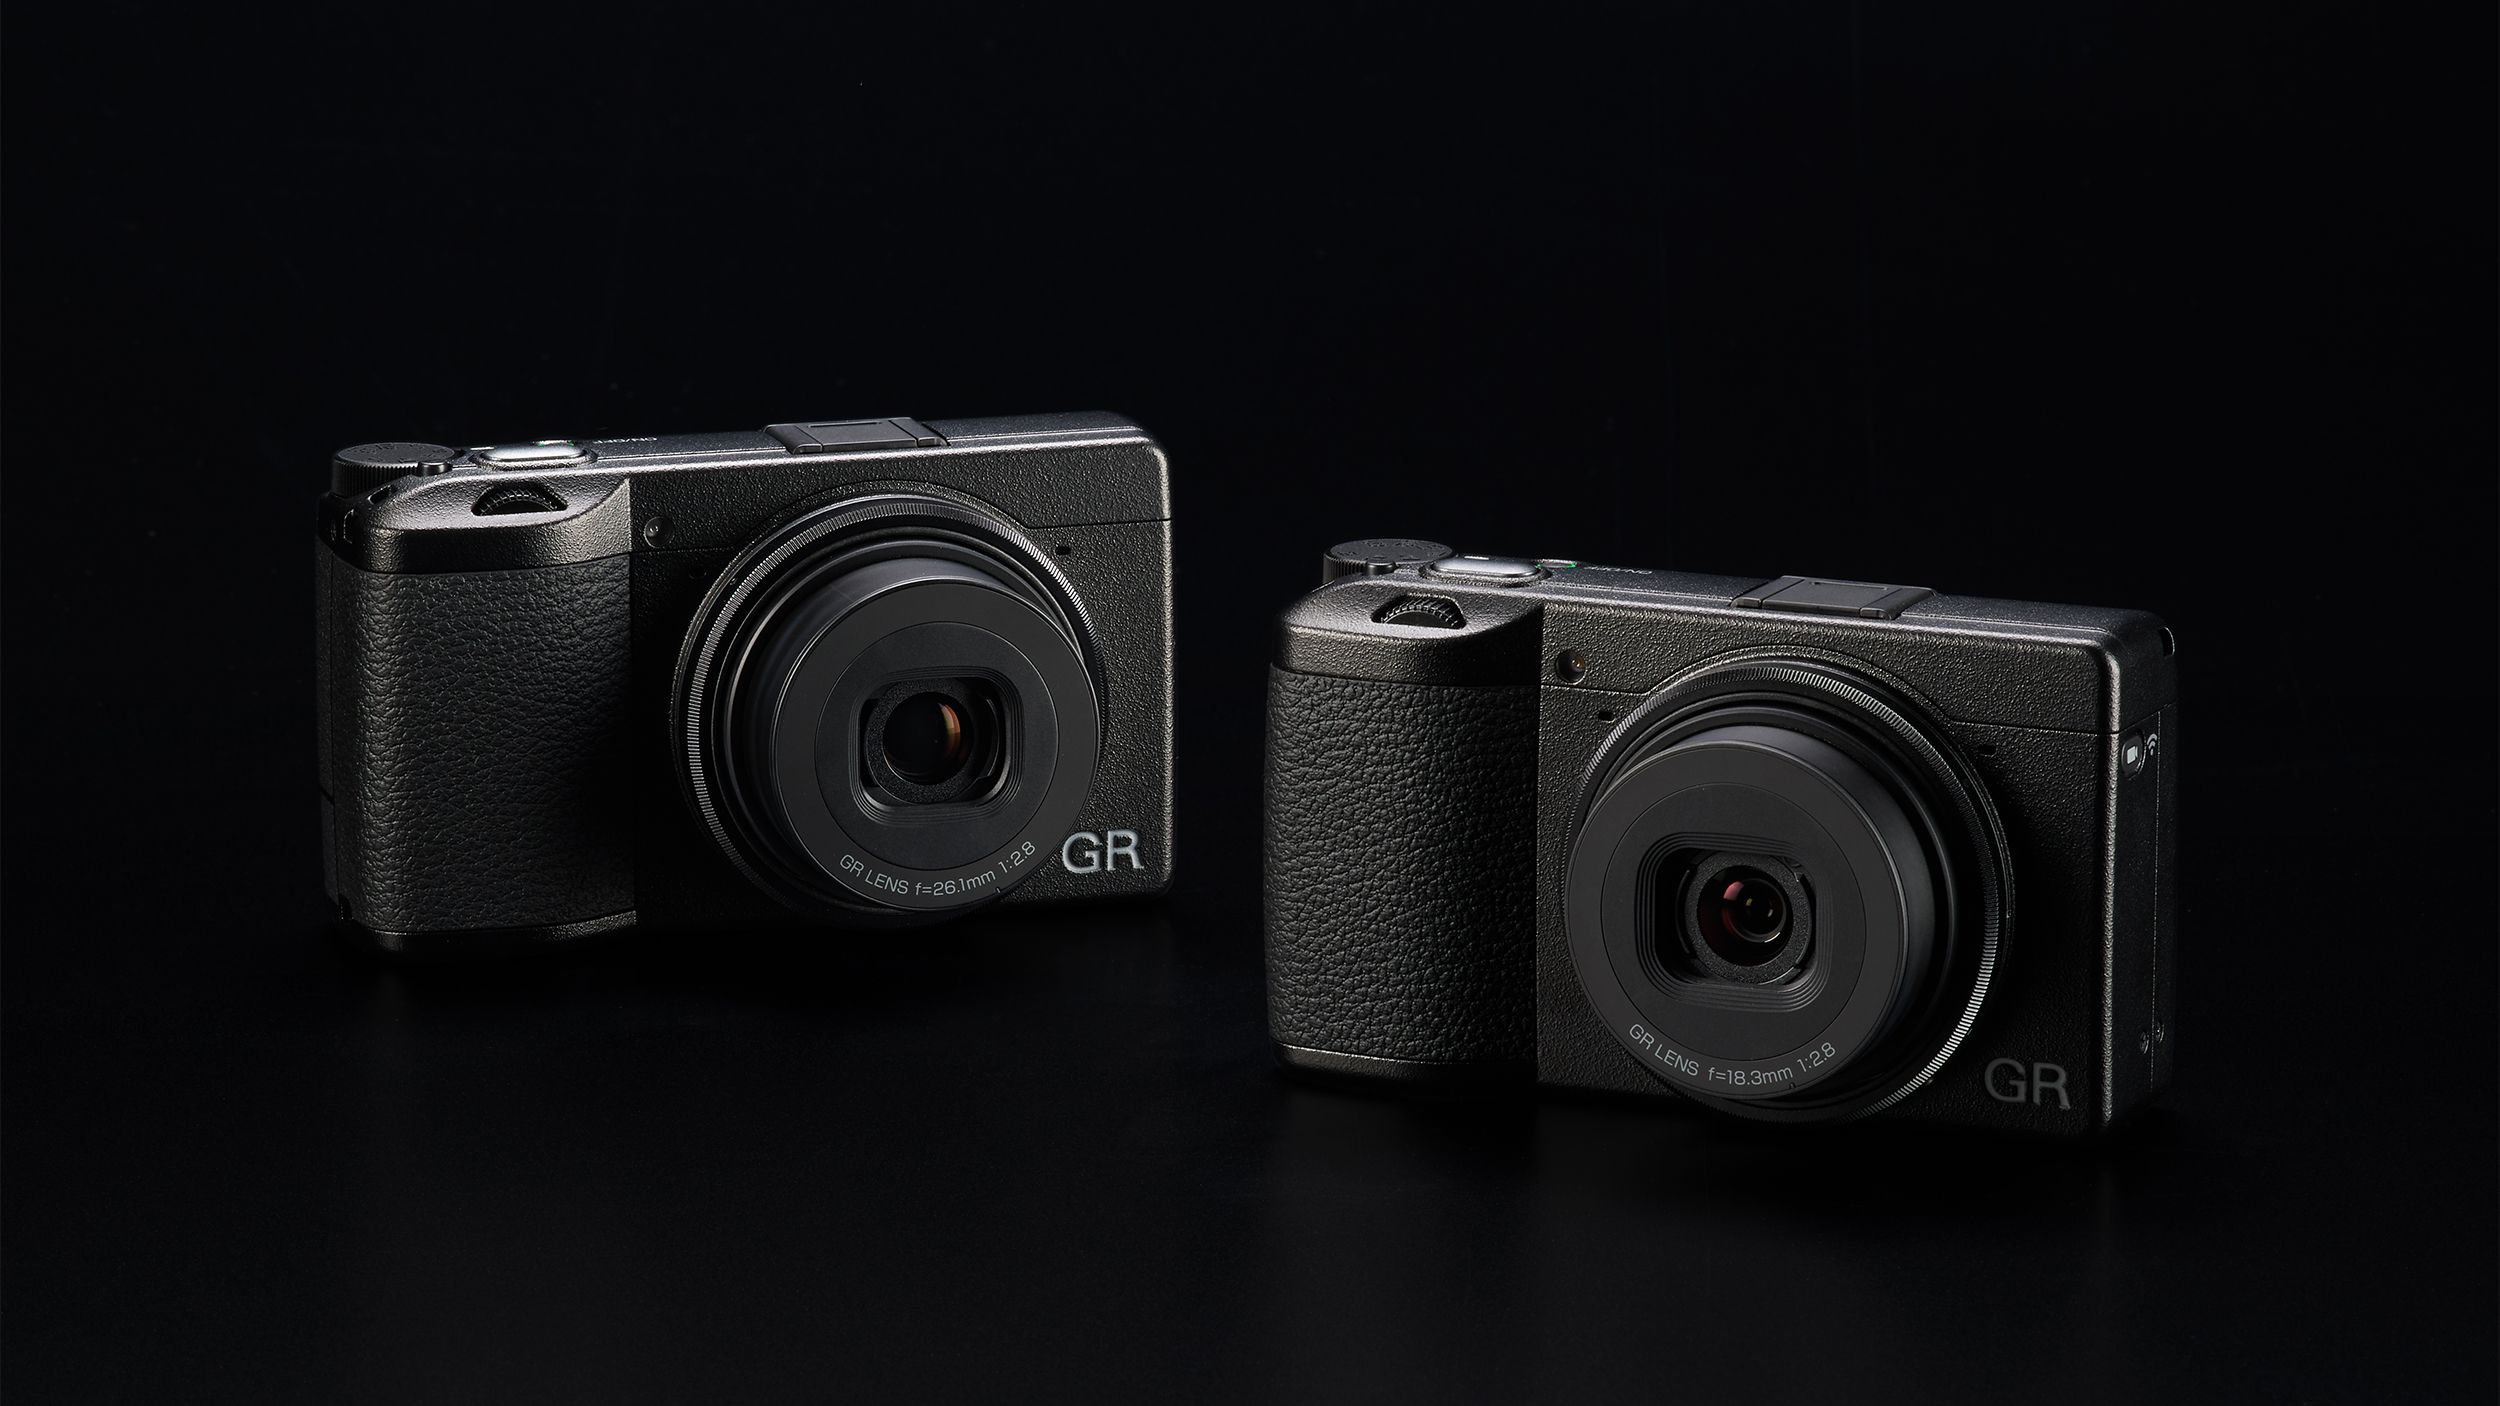 The Rocoh GR II HDF and GR IIIx HDF cameras against a black background